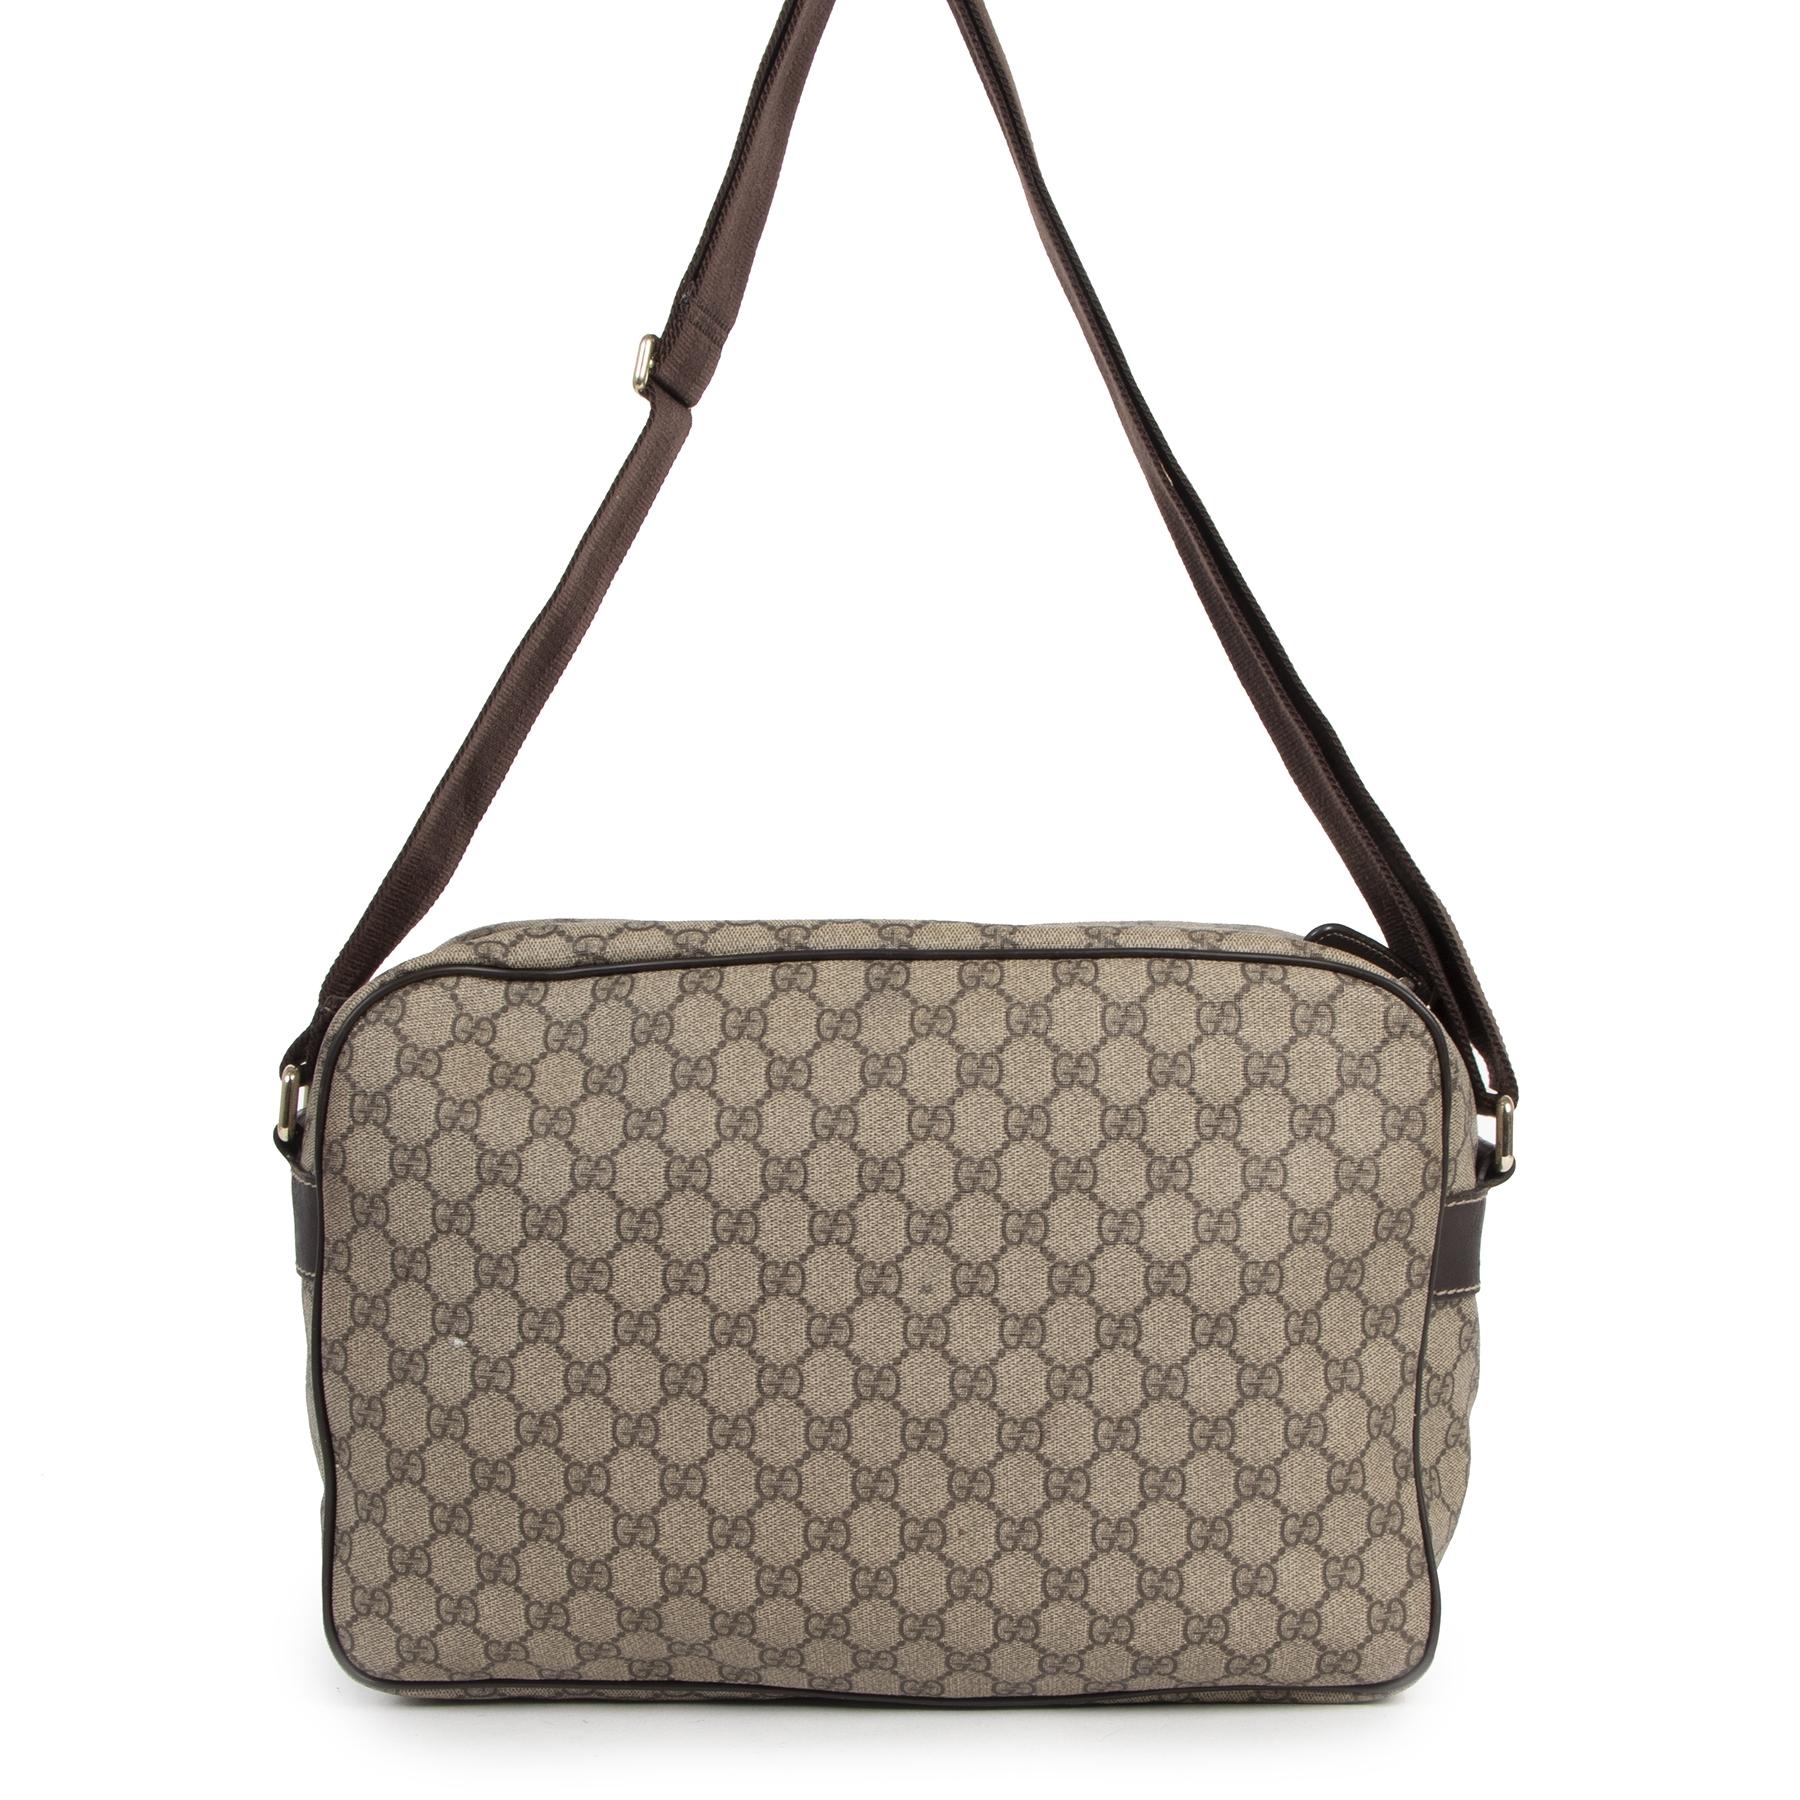 Good preloved condition

Gucci GG Monogram Canvas Travel Messenger Bag

Crafted out of iconic GG monogram canvas with brown leather trims and featuring comfortable and adjustable fabric body strap finished off with polished silver hardware.
This